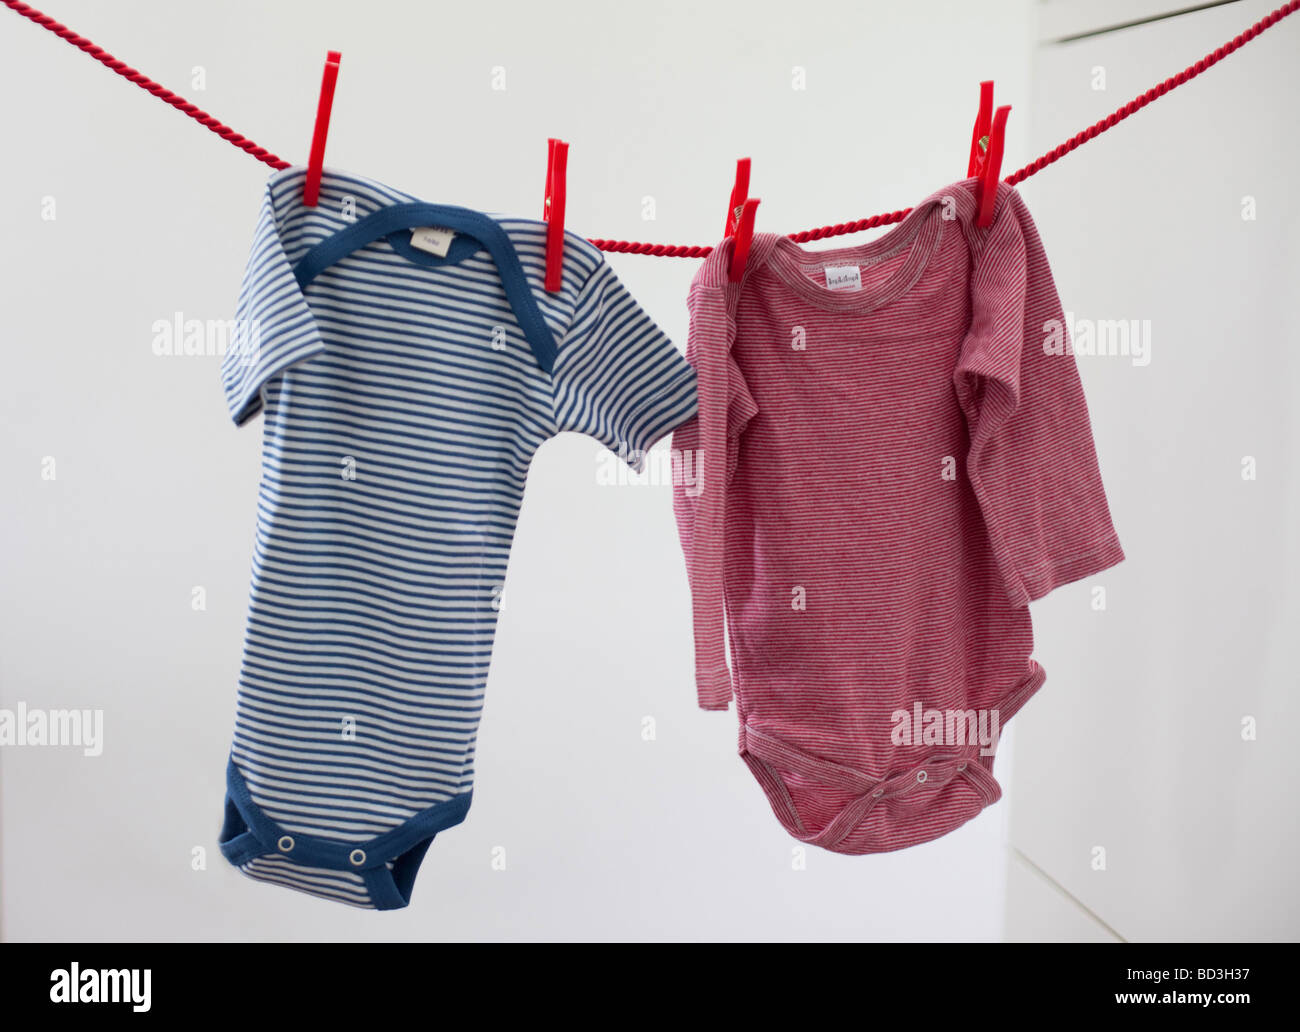 Clothesline with Baby clothing Stock Photo